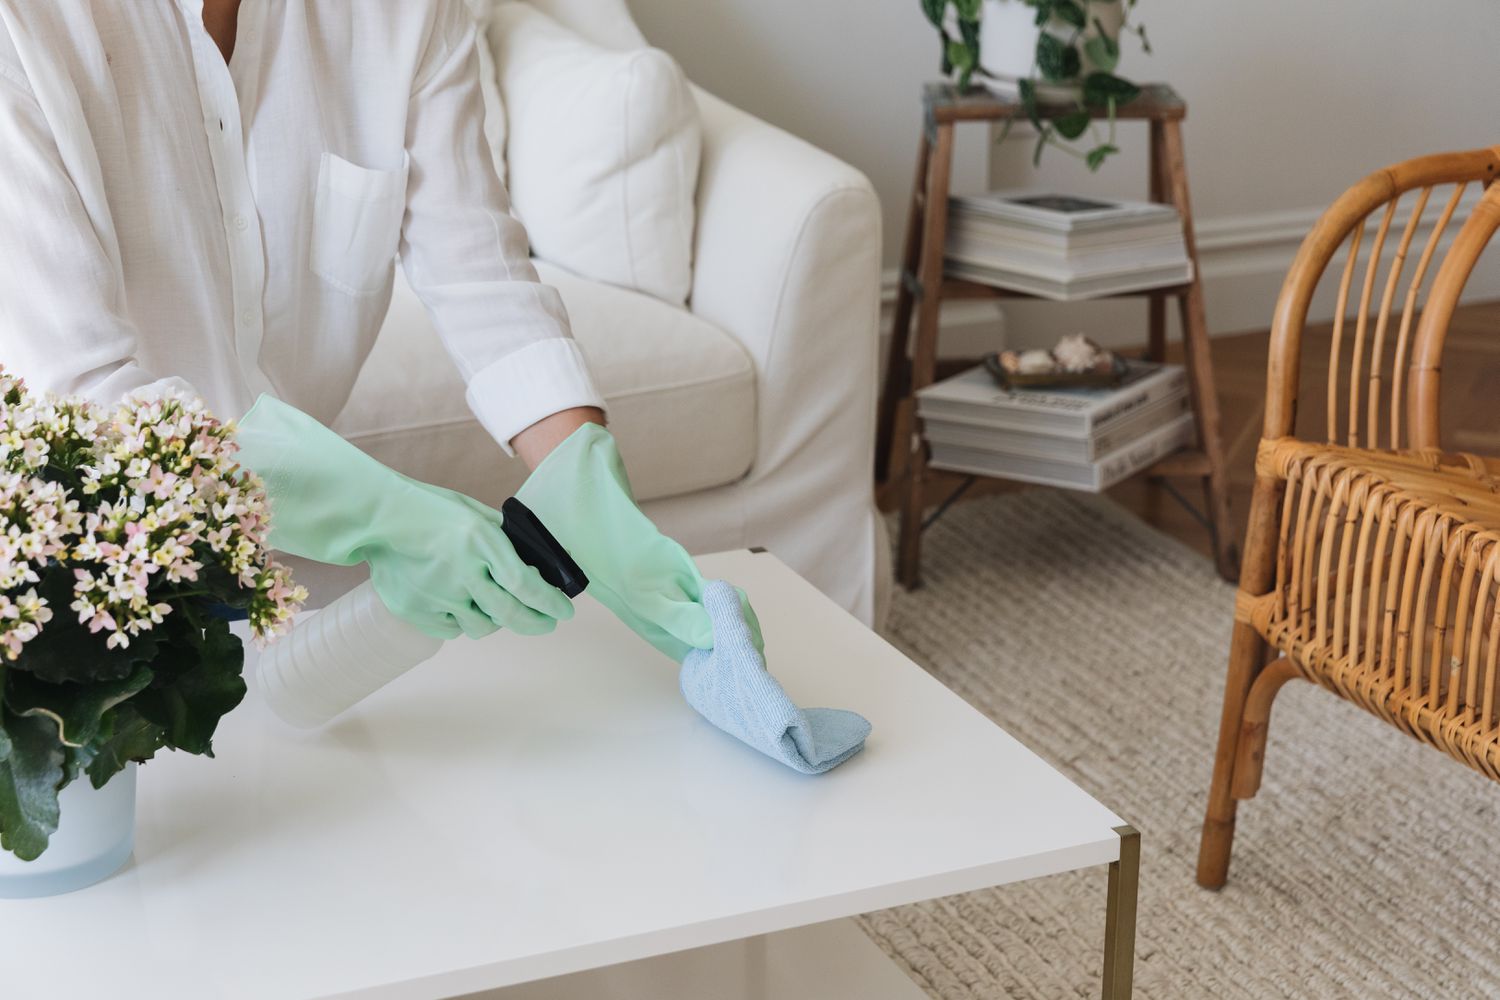 How To Prepare For Spring Cleaning: 6 Steps Experts Take